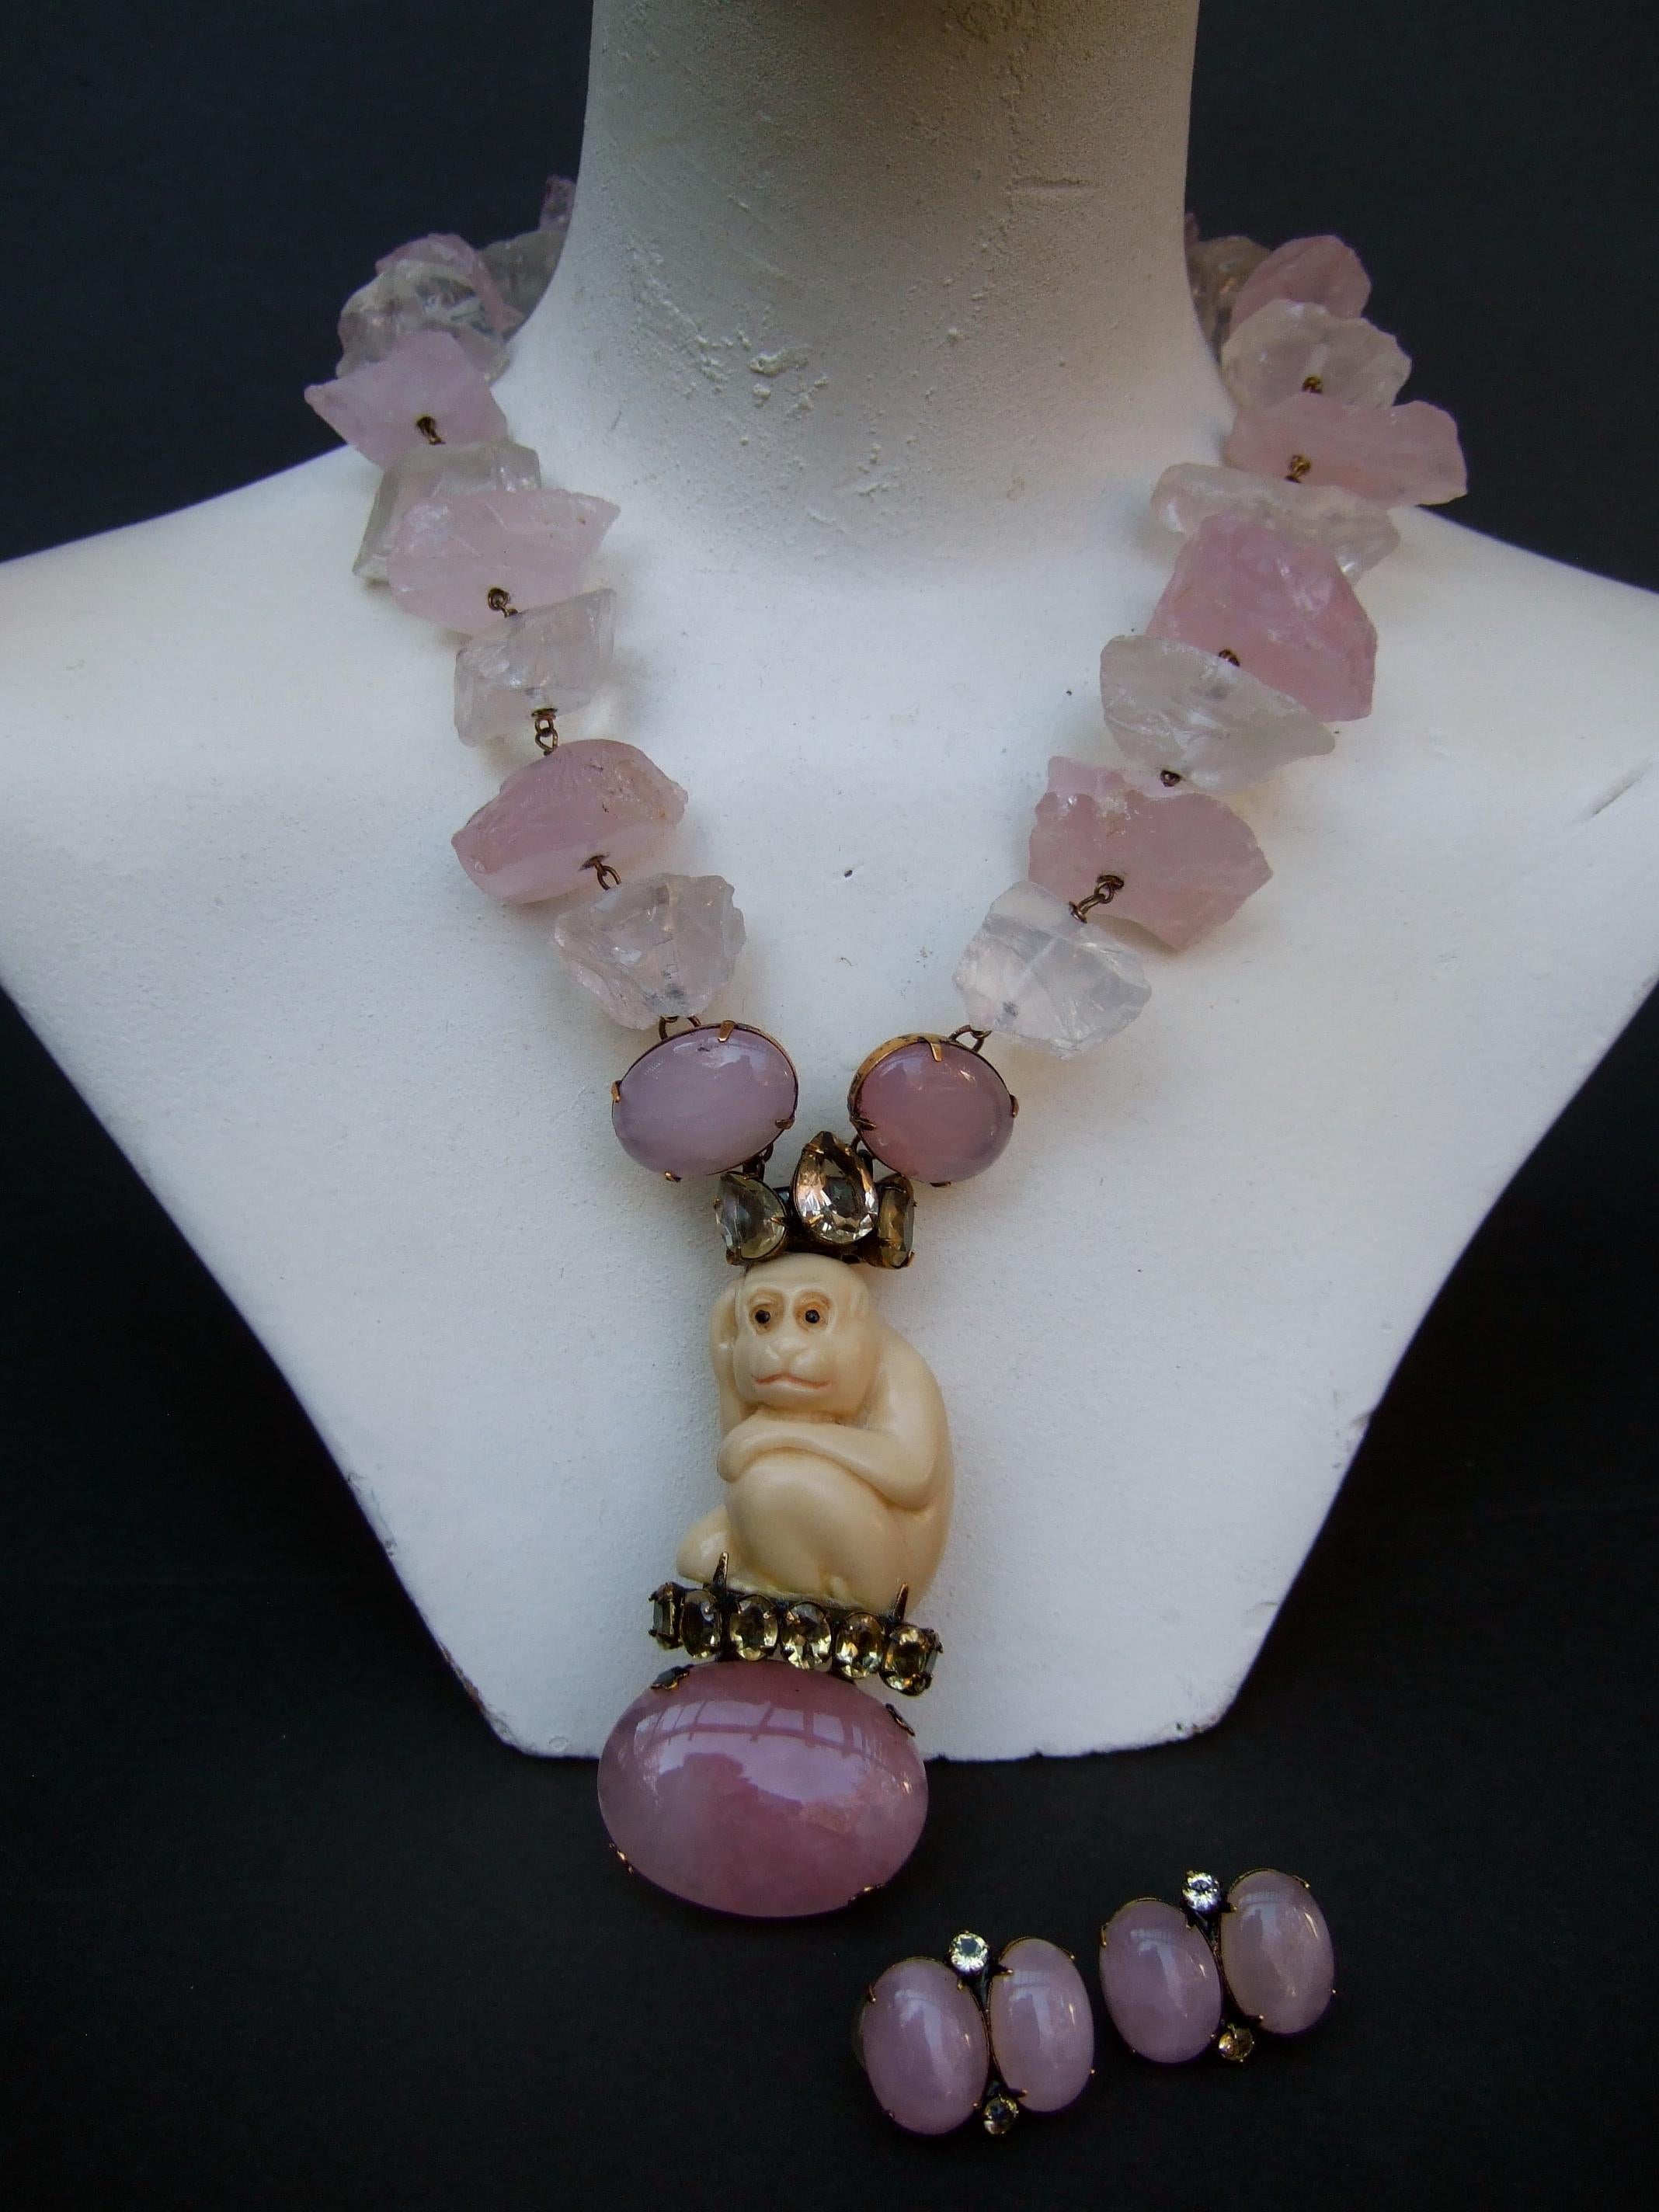 Iradj Moini Exquisite chunky semi precious rose quartz & rock crystal carved monkey necklace & earrings ensemble 
The handmade artisan necklace is constructed with chunky rough cut pale pink rose quartz stones;
juxtaposed with clear rough cut